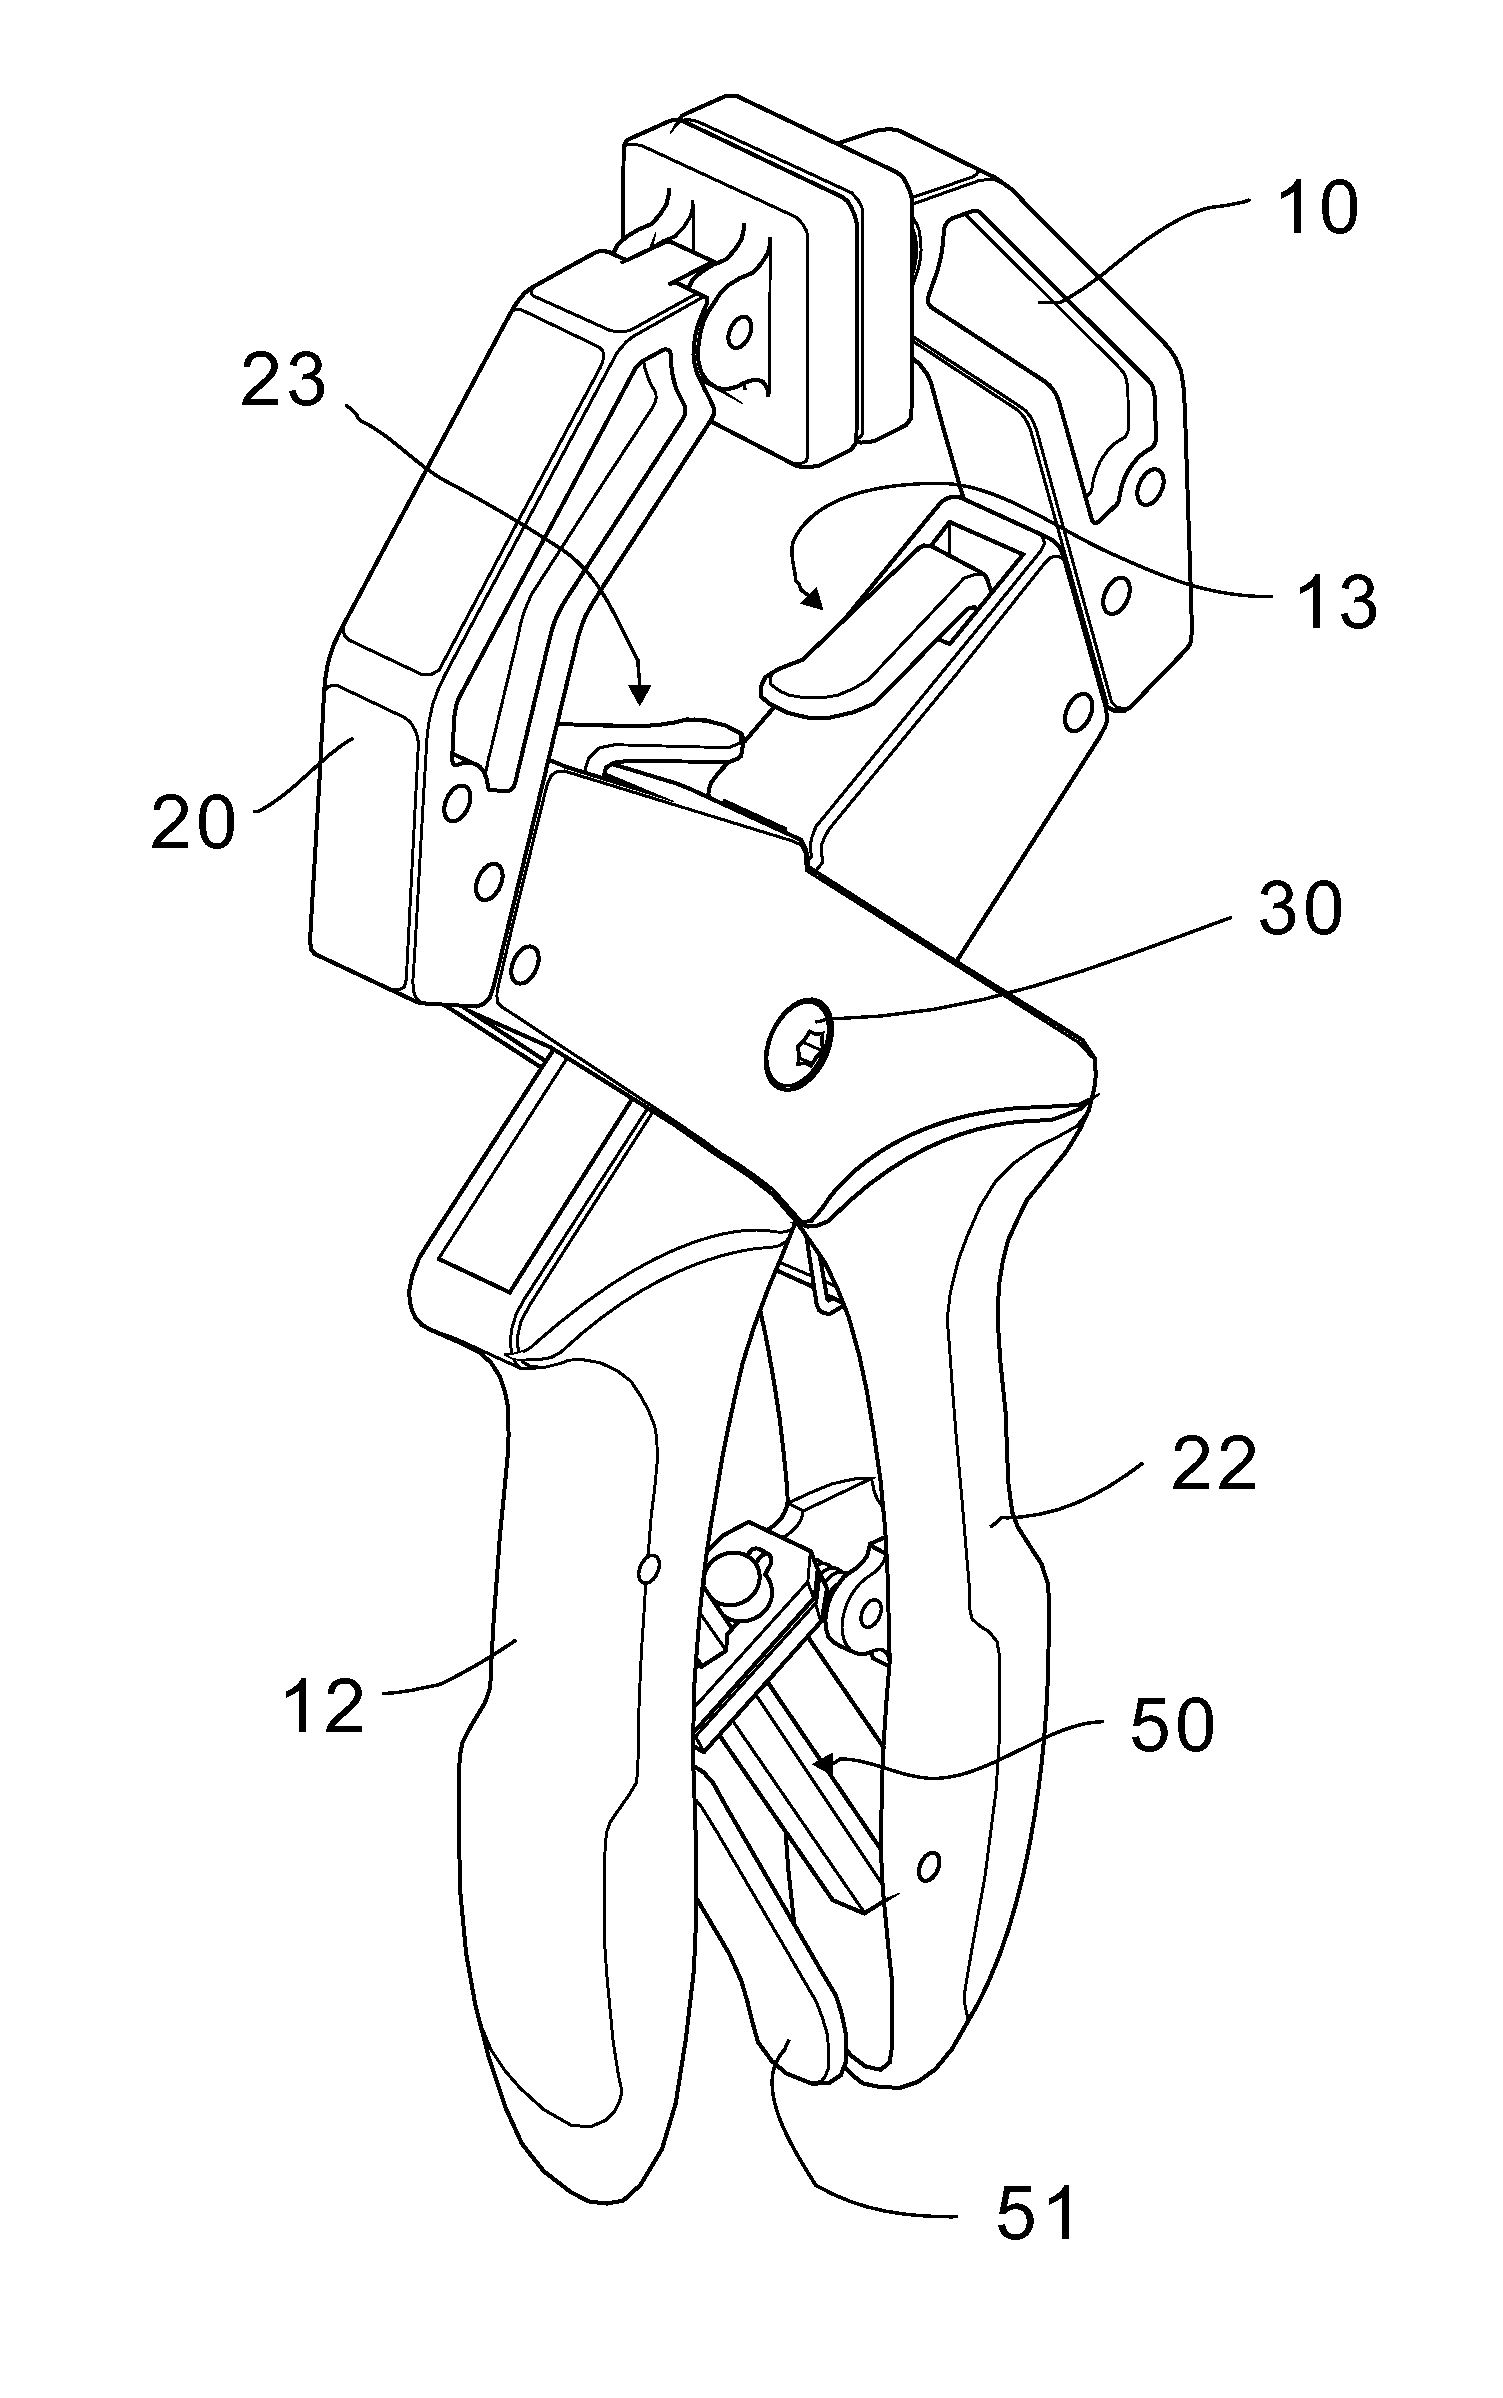 Locking pliers with one or two slide bars each secured to a stationary jaw carrier